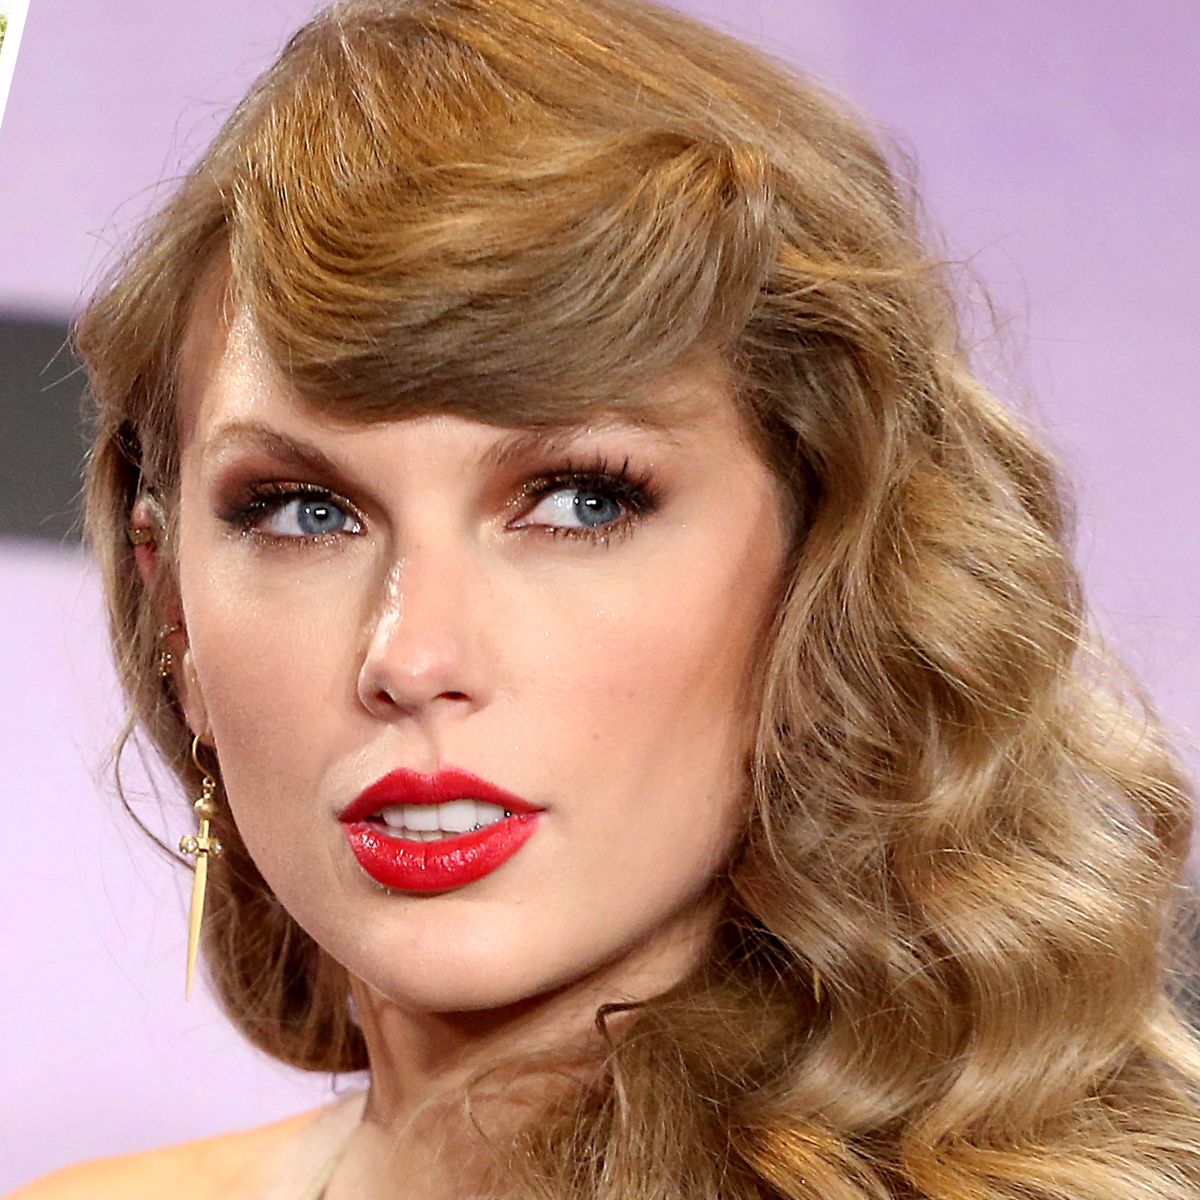 On 'Midnights', Taylor Swift Is Revising Her Own Love Stories